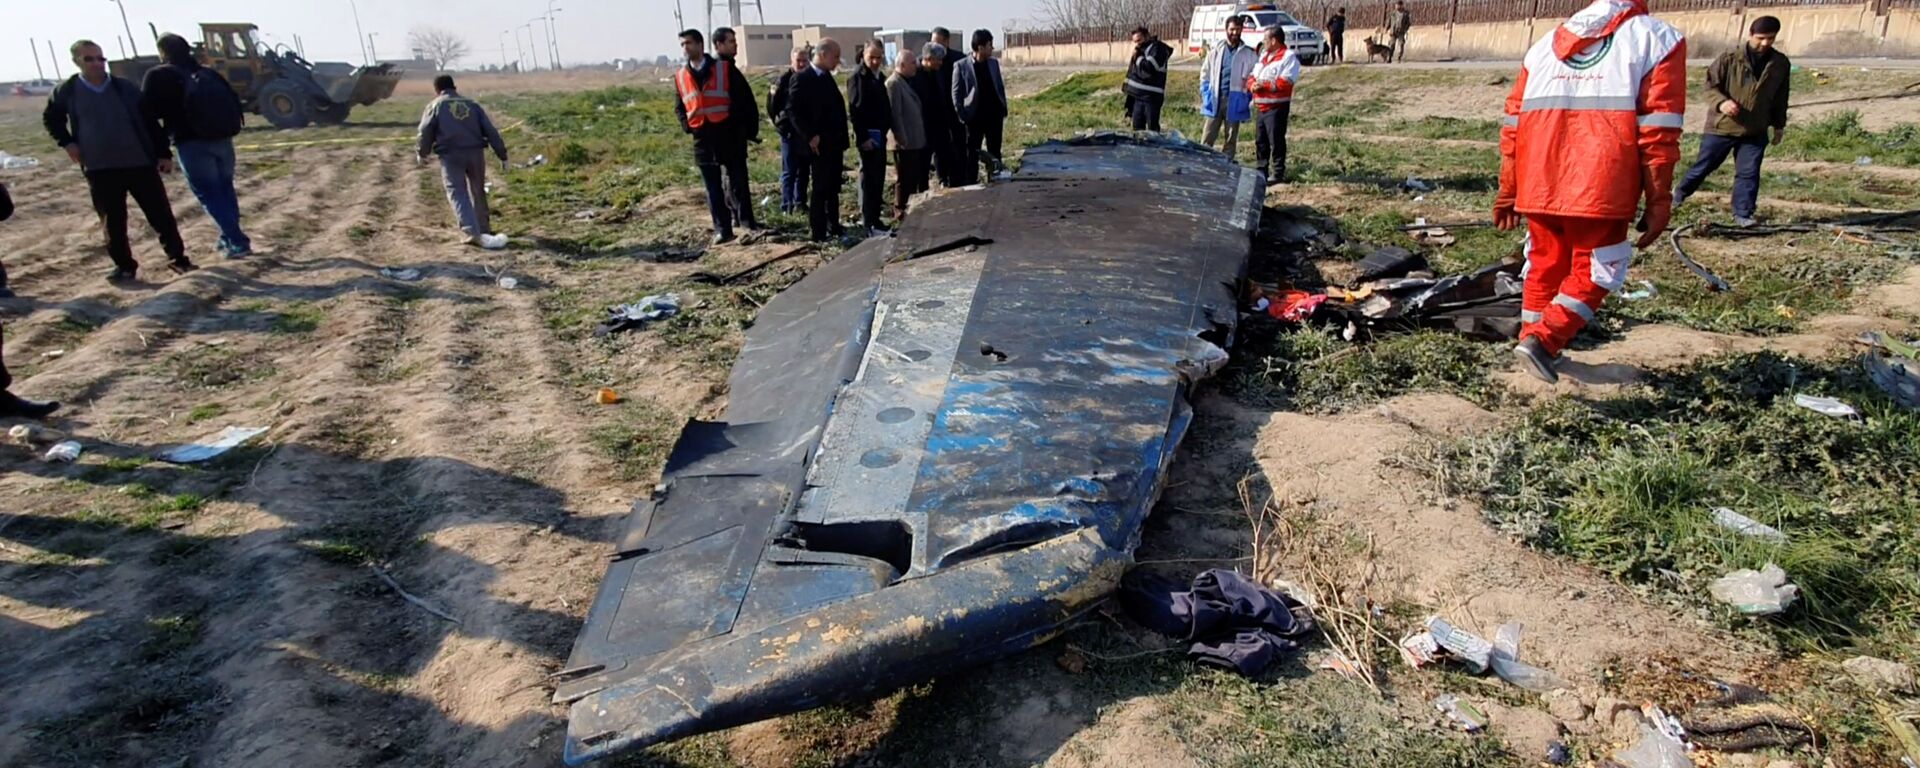 General view of the debris of the Ukraine International Airlines, flight PS752, Boeing 737-800 plane that crashed after take-off from Iran's Imam Khomeini airport, on the outskirts of Tehran, Iran January 8, 2020 - Sputnik International, 1920, 14.01.2020